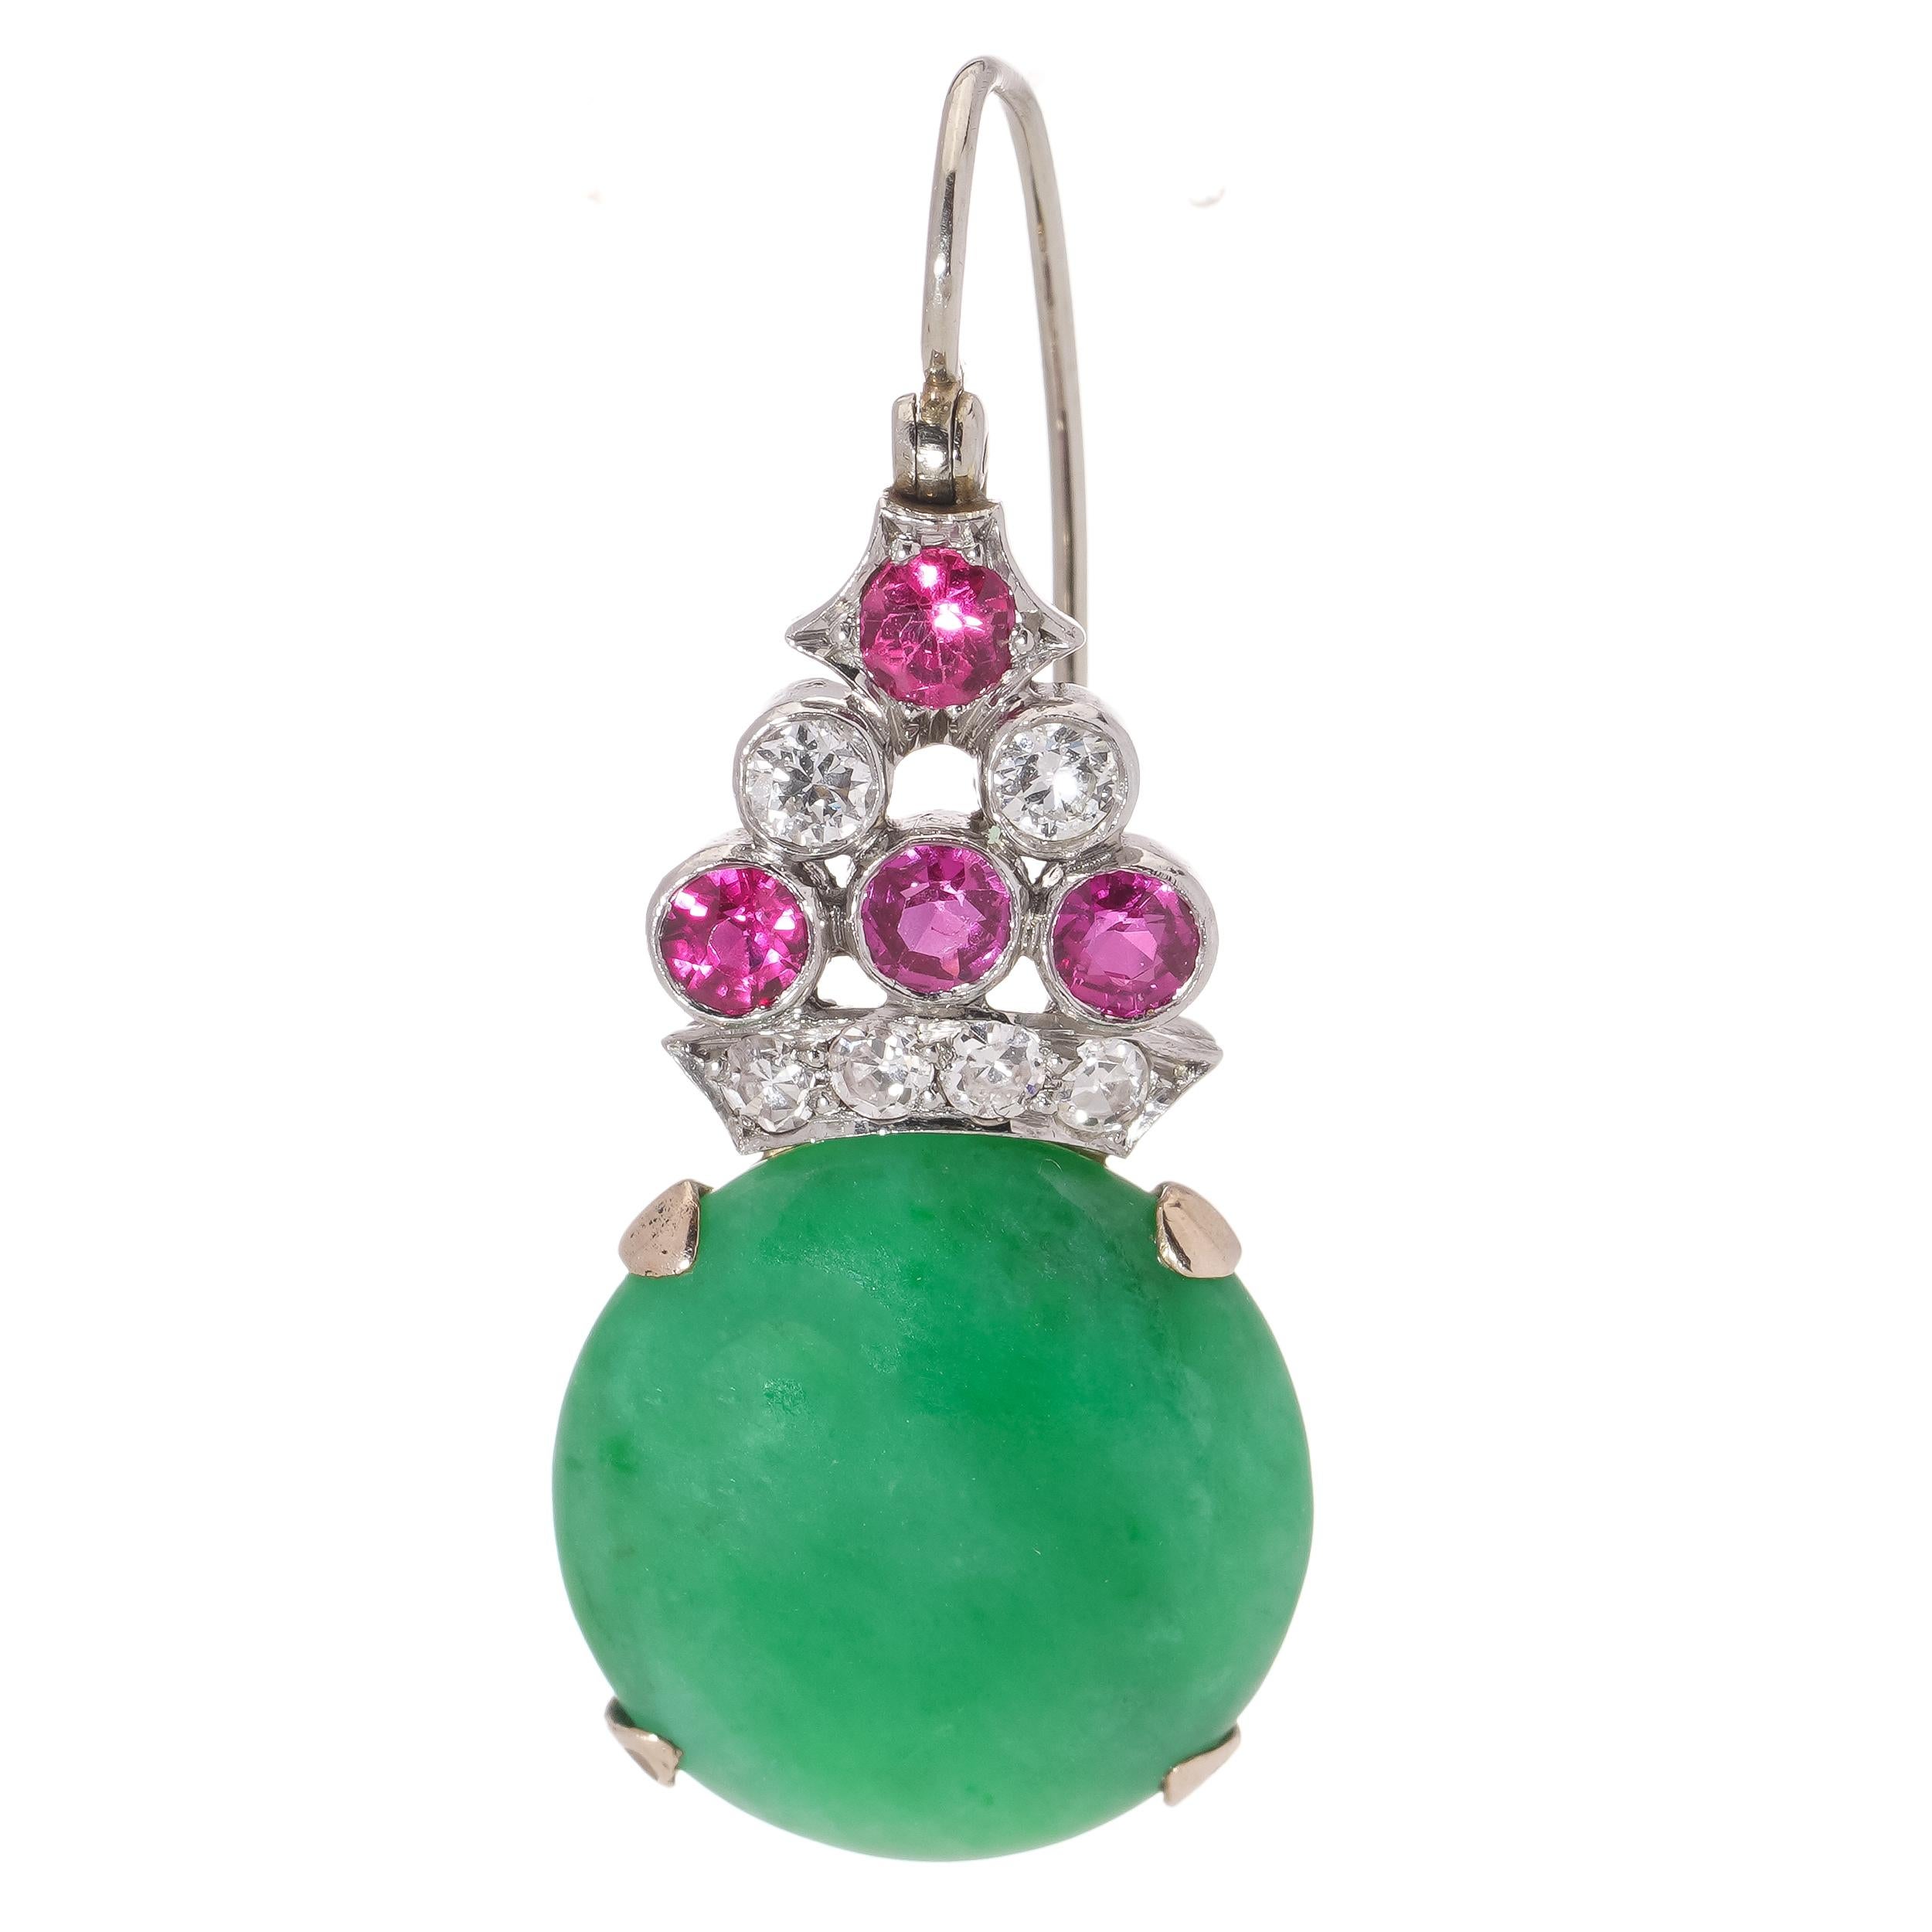 Vintage Platinum and 9kt. gold hook earrings with Jadeite, diamonds, and rubies. 1